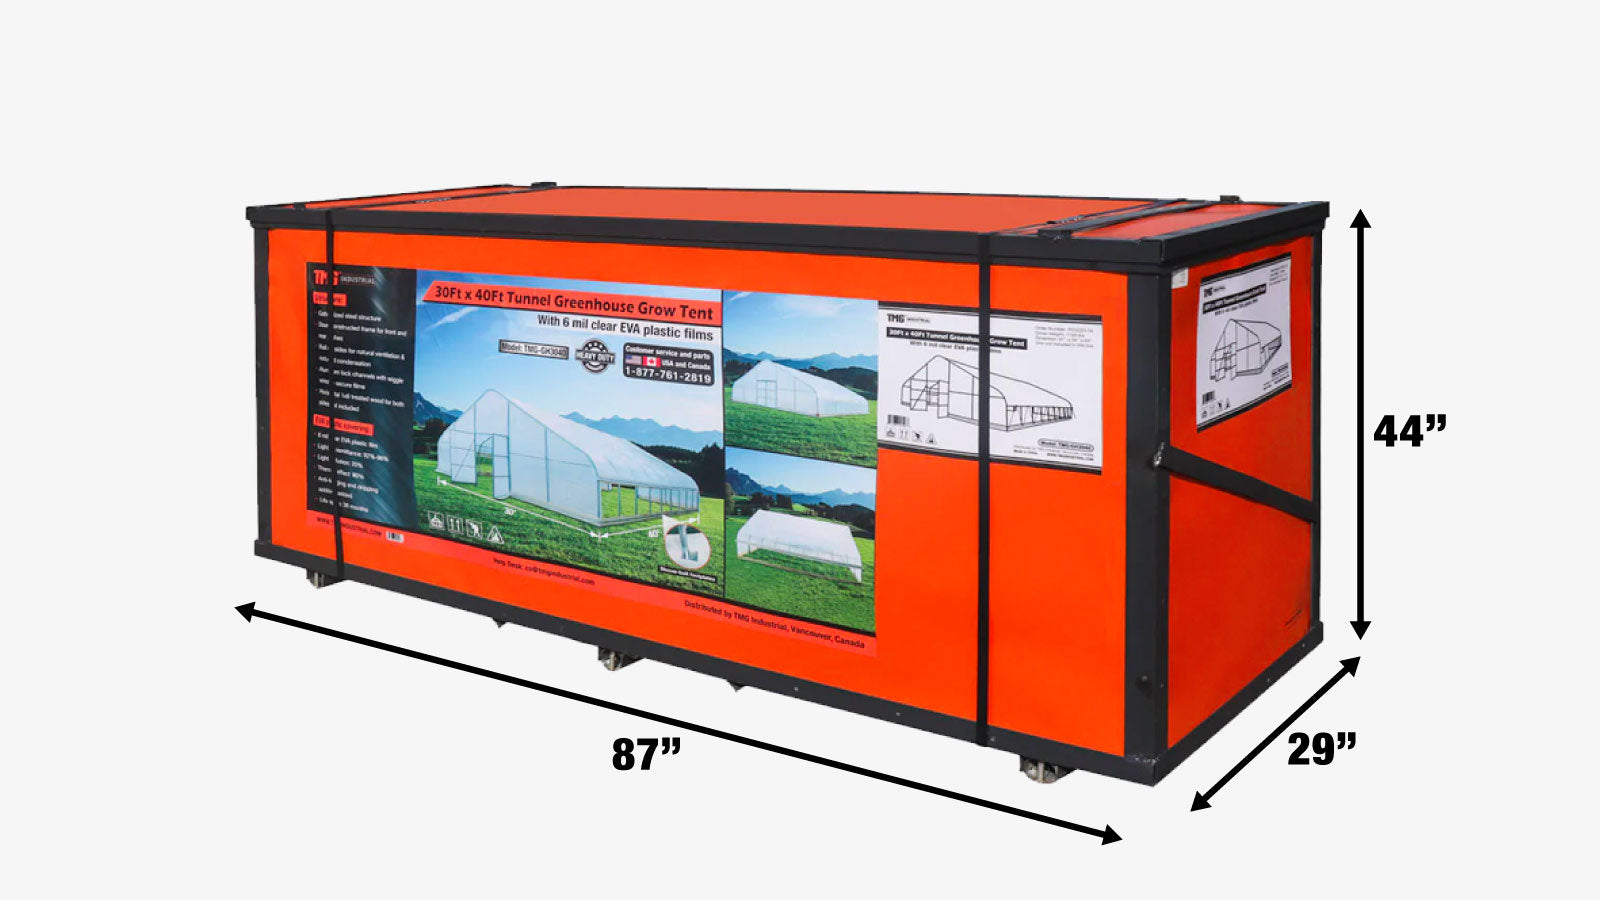 TMG Industrial 30’ x 40’ Tunnel Greenhouse Grow Tent w/6 Mil Clear EVA Plastic Film, Cold Frame, Hand Crank Roll-Up Sides, Peak Ceiling Roof, TMG-GH3040-shipping-info-image